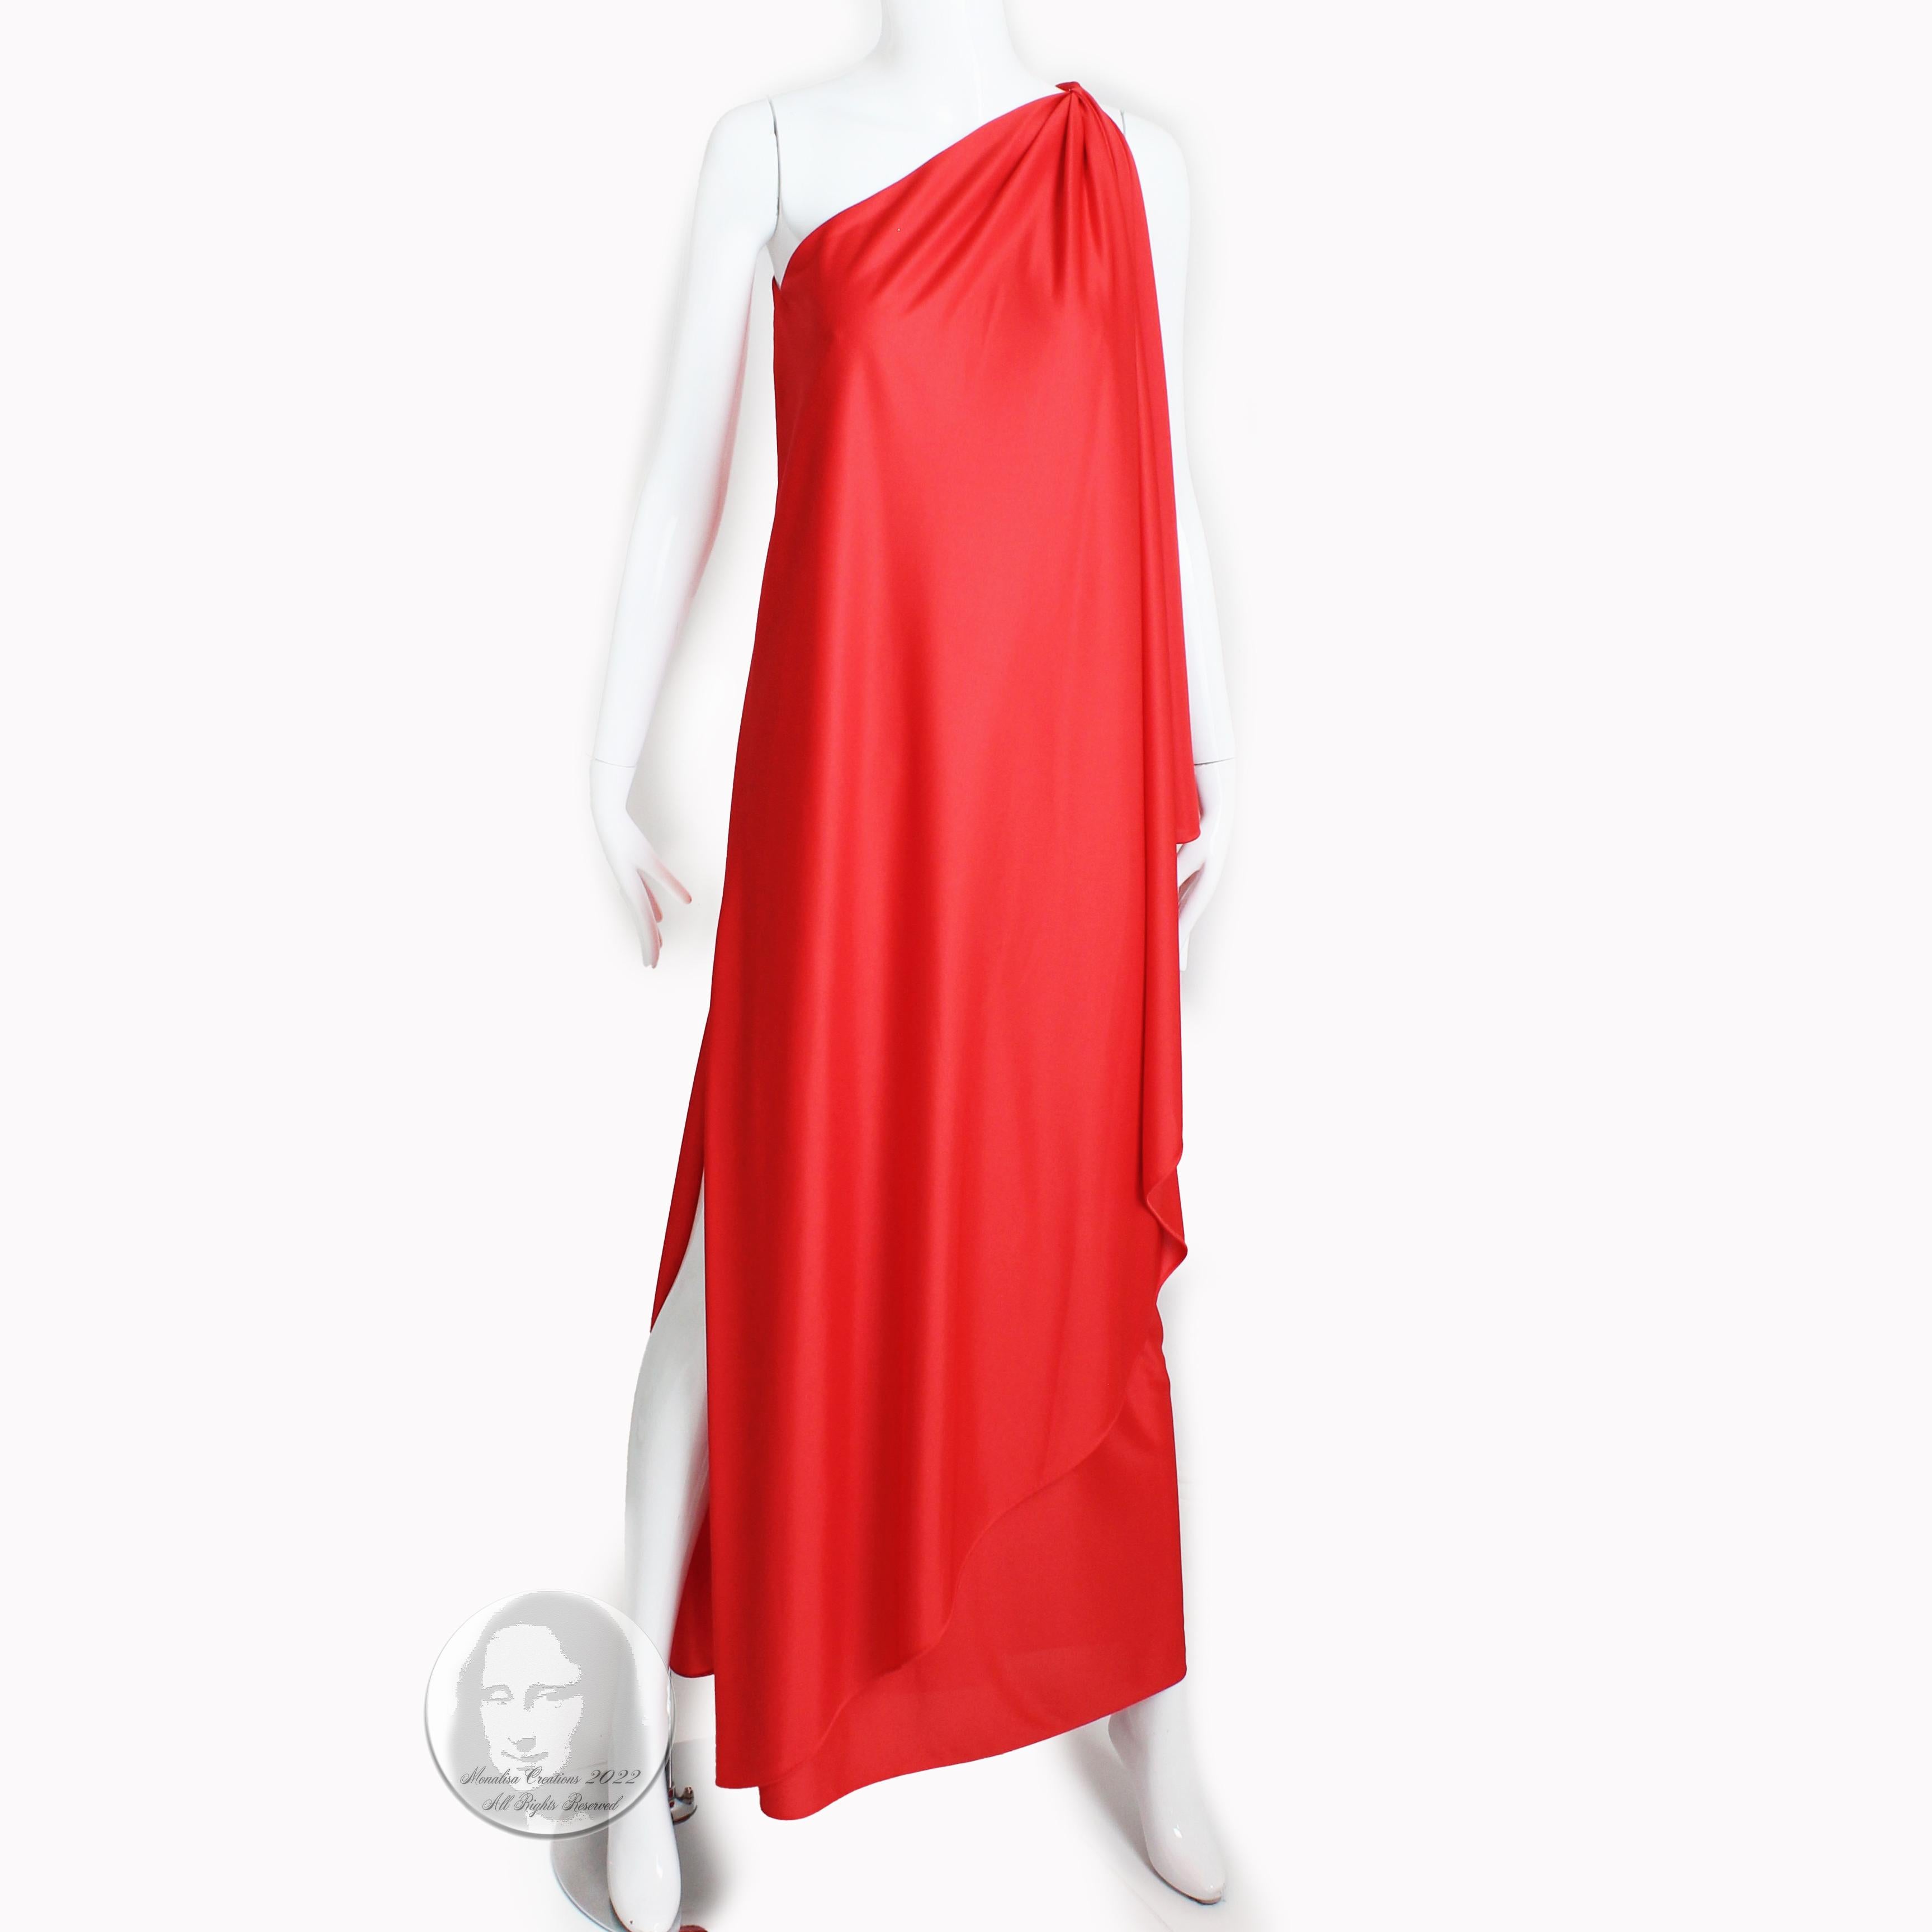 Authentic, New With Tag/New Old Stock vintage Halston one shoulder evening gown red draped maxi dress, made in the late 70s. Fabulously chic gown, the cut and draping on this piece is meant to show off one's curves! Made from an orange-hued red